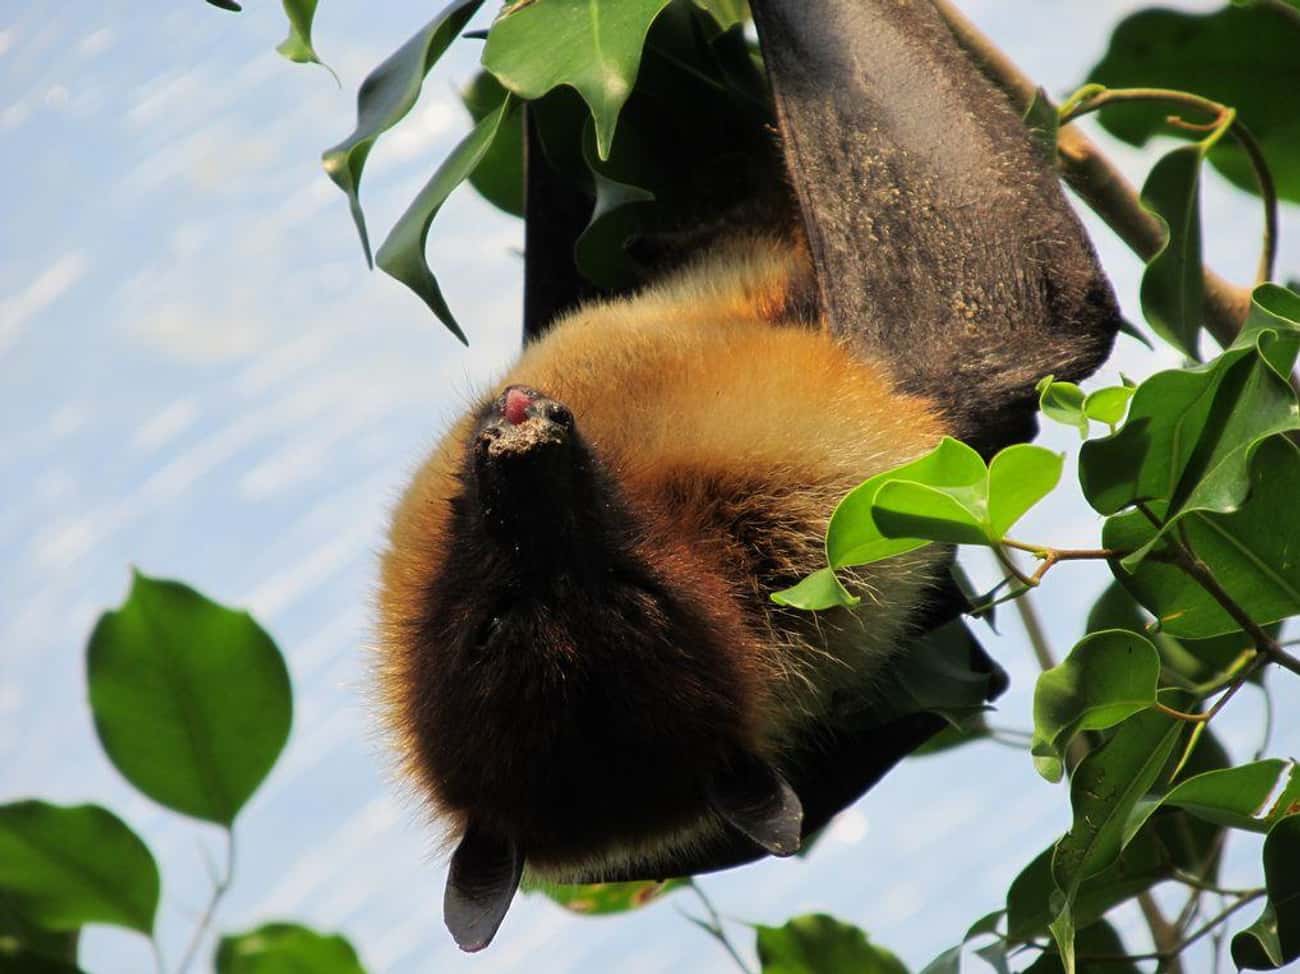 Flying Foxes Are The World's Largest Bat